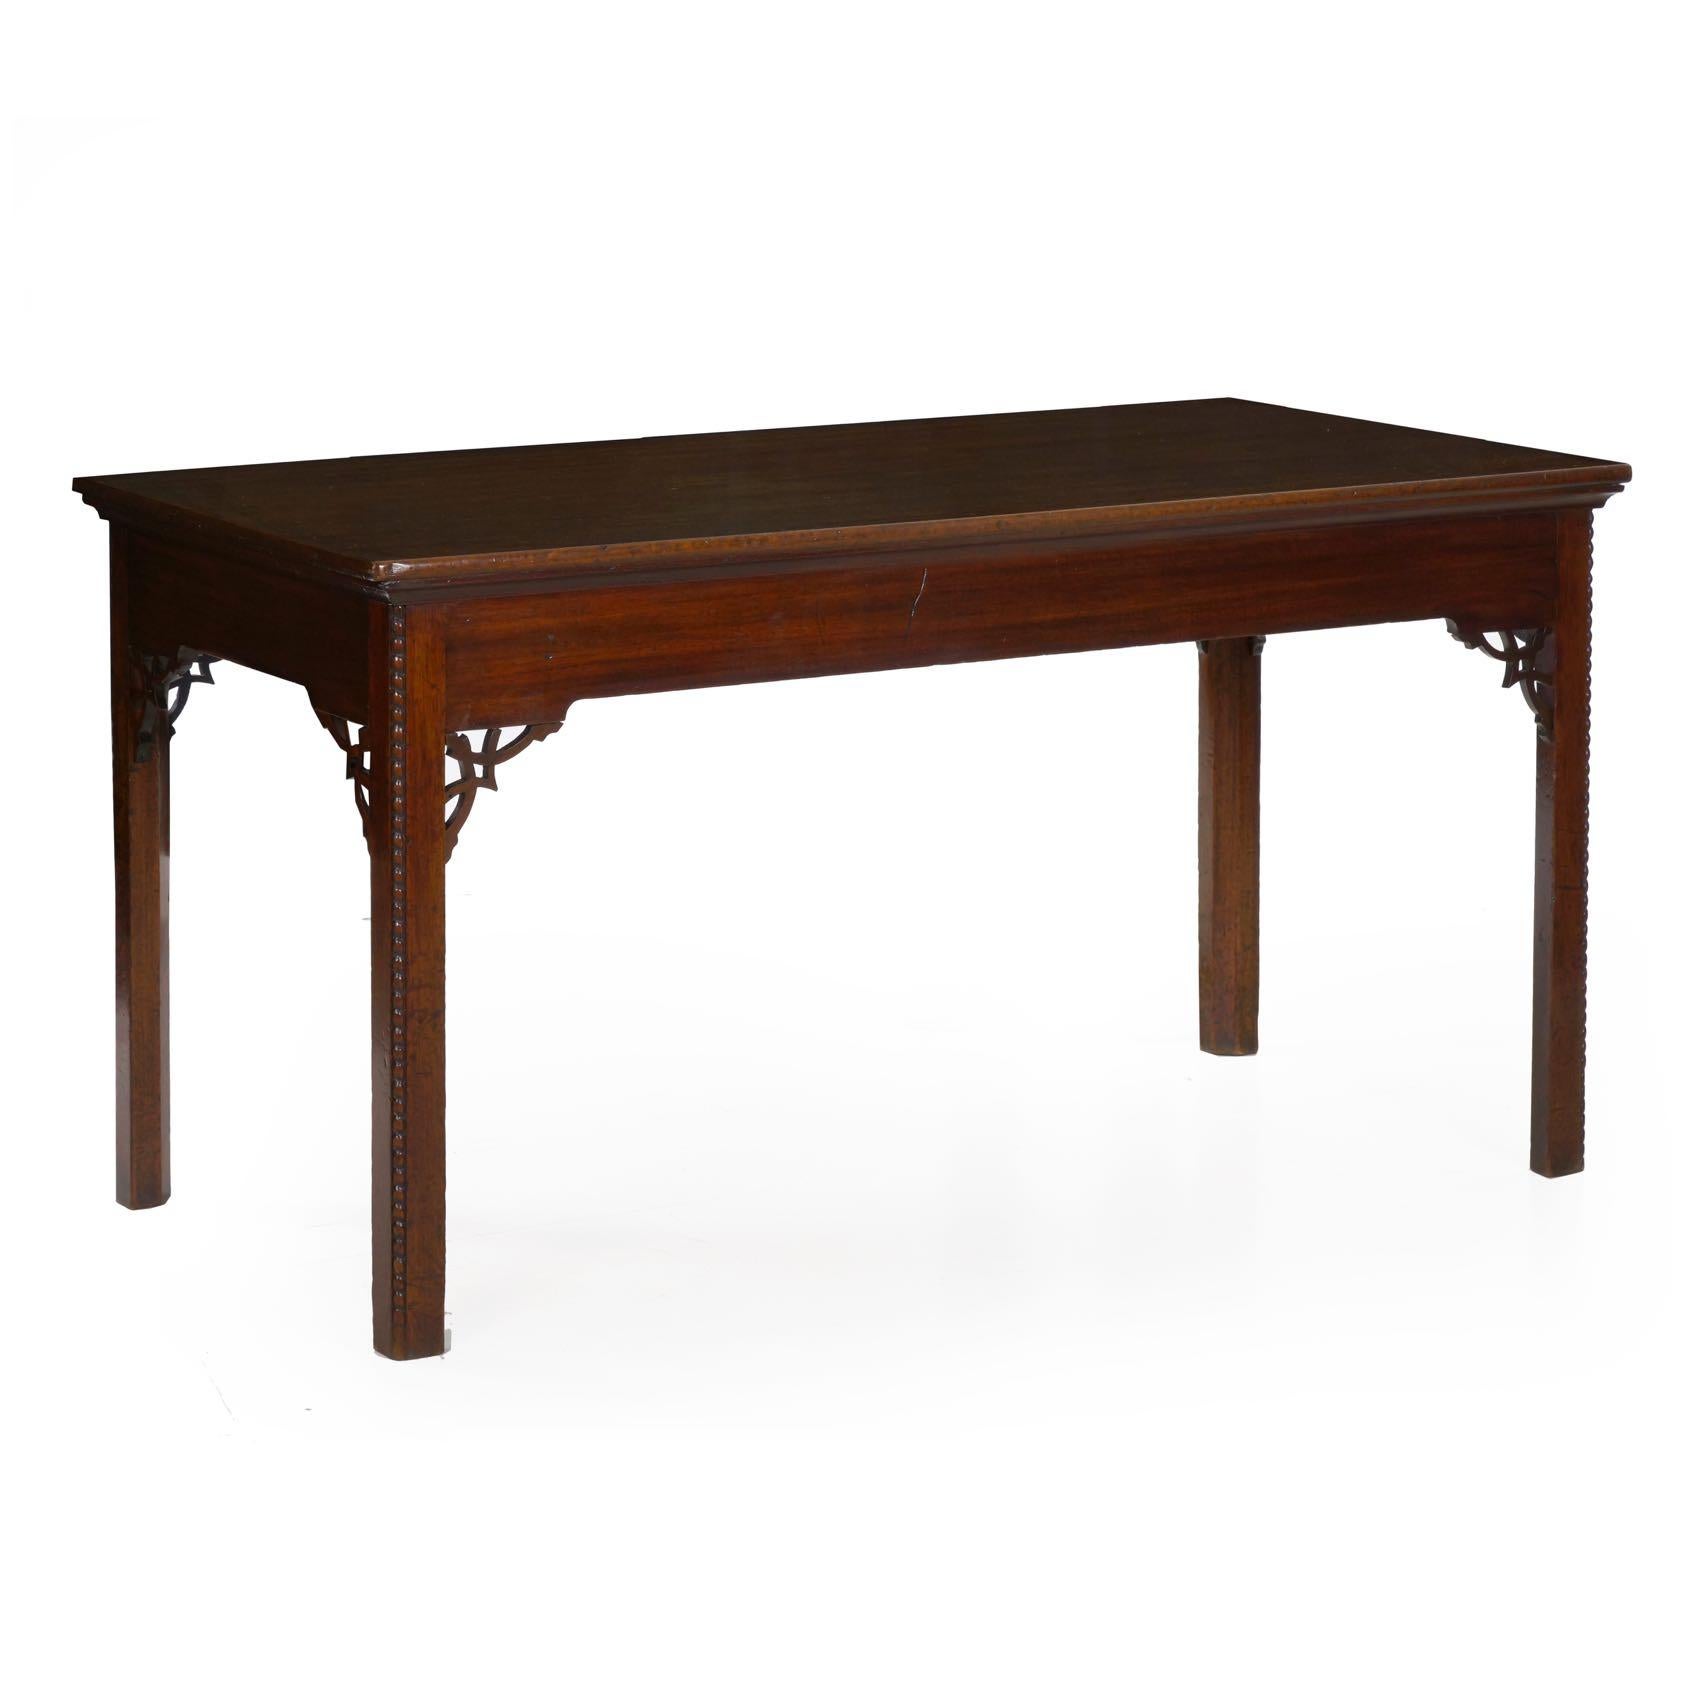 An excellent Chippendale console table crafted of dense solid mahogany during the third quarter of the 18th century, the form is simple and clean. Intended to serve as a center table, it has been designed such that it presents beautifully from all